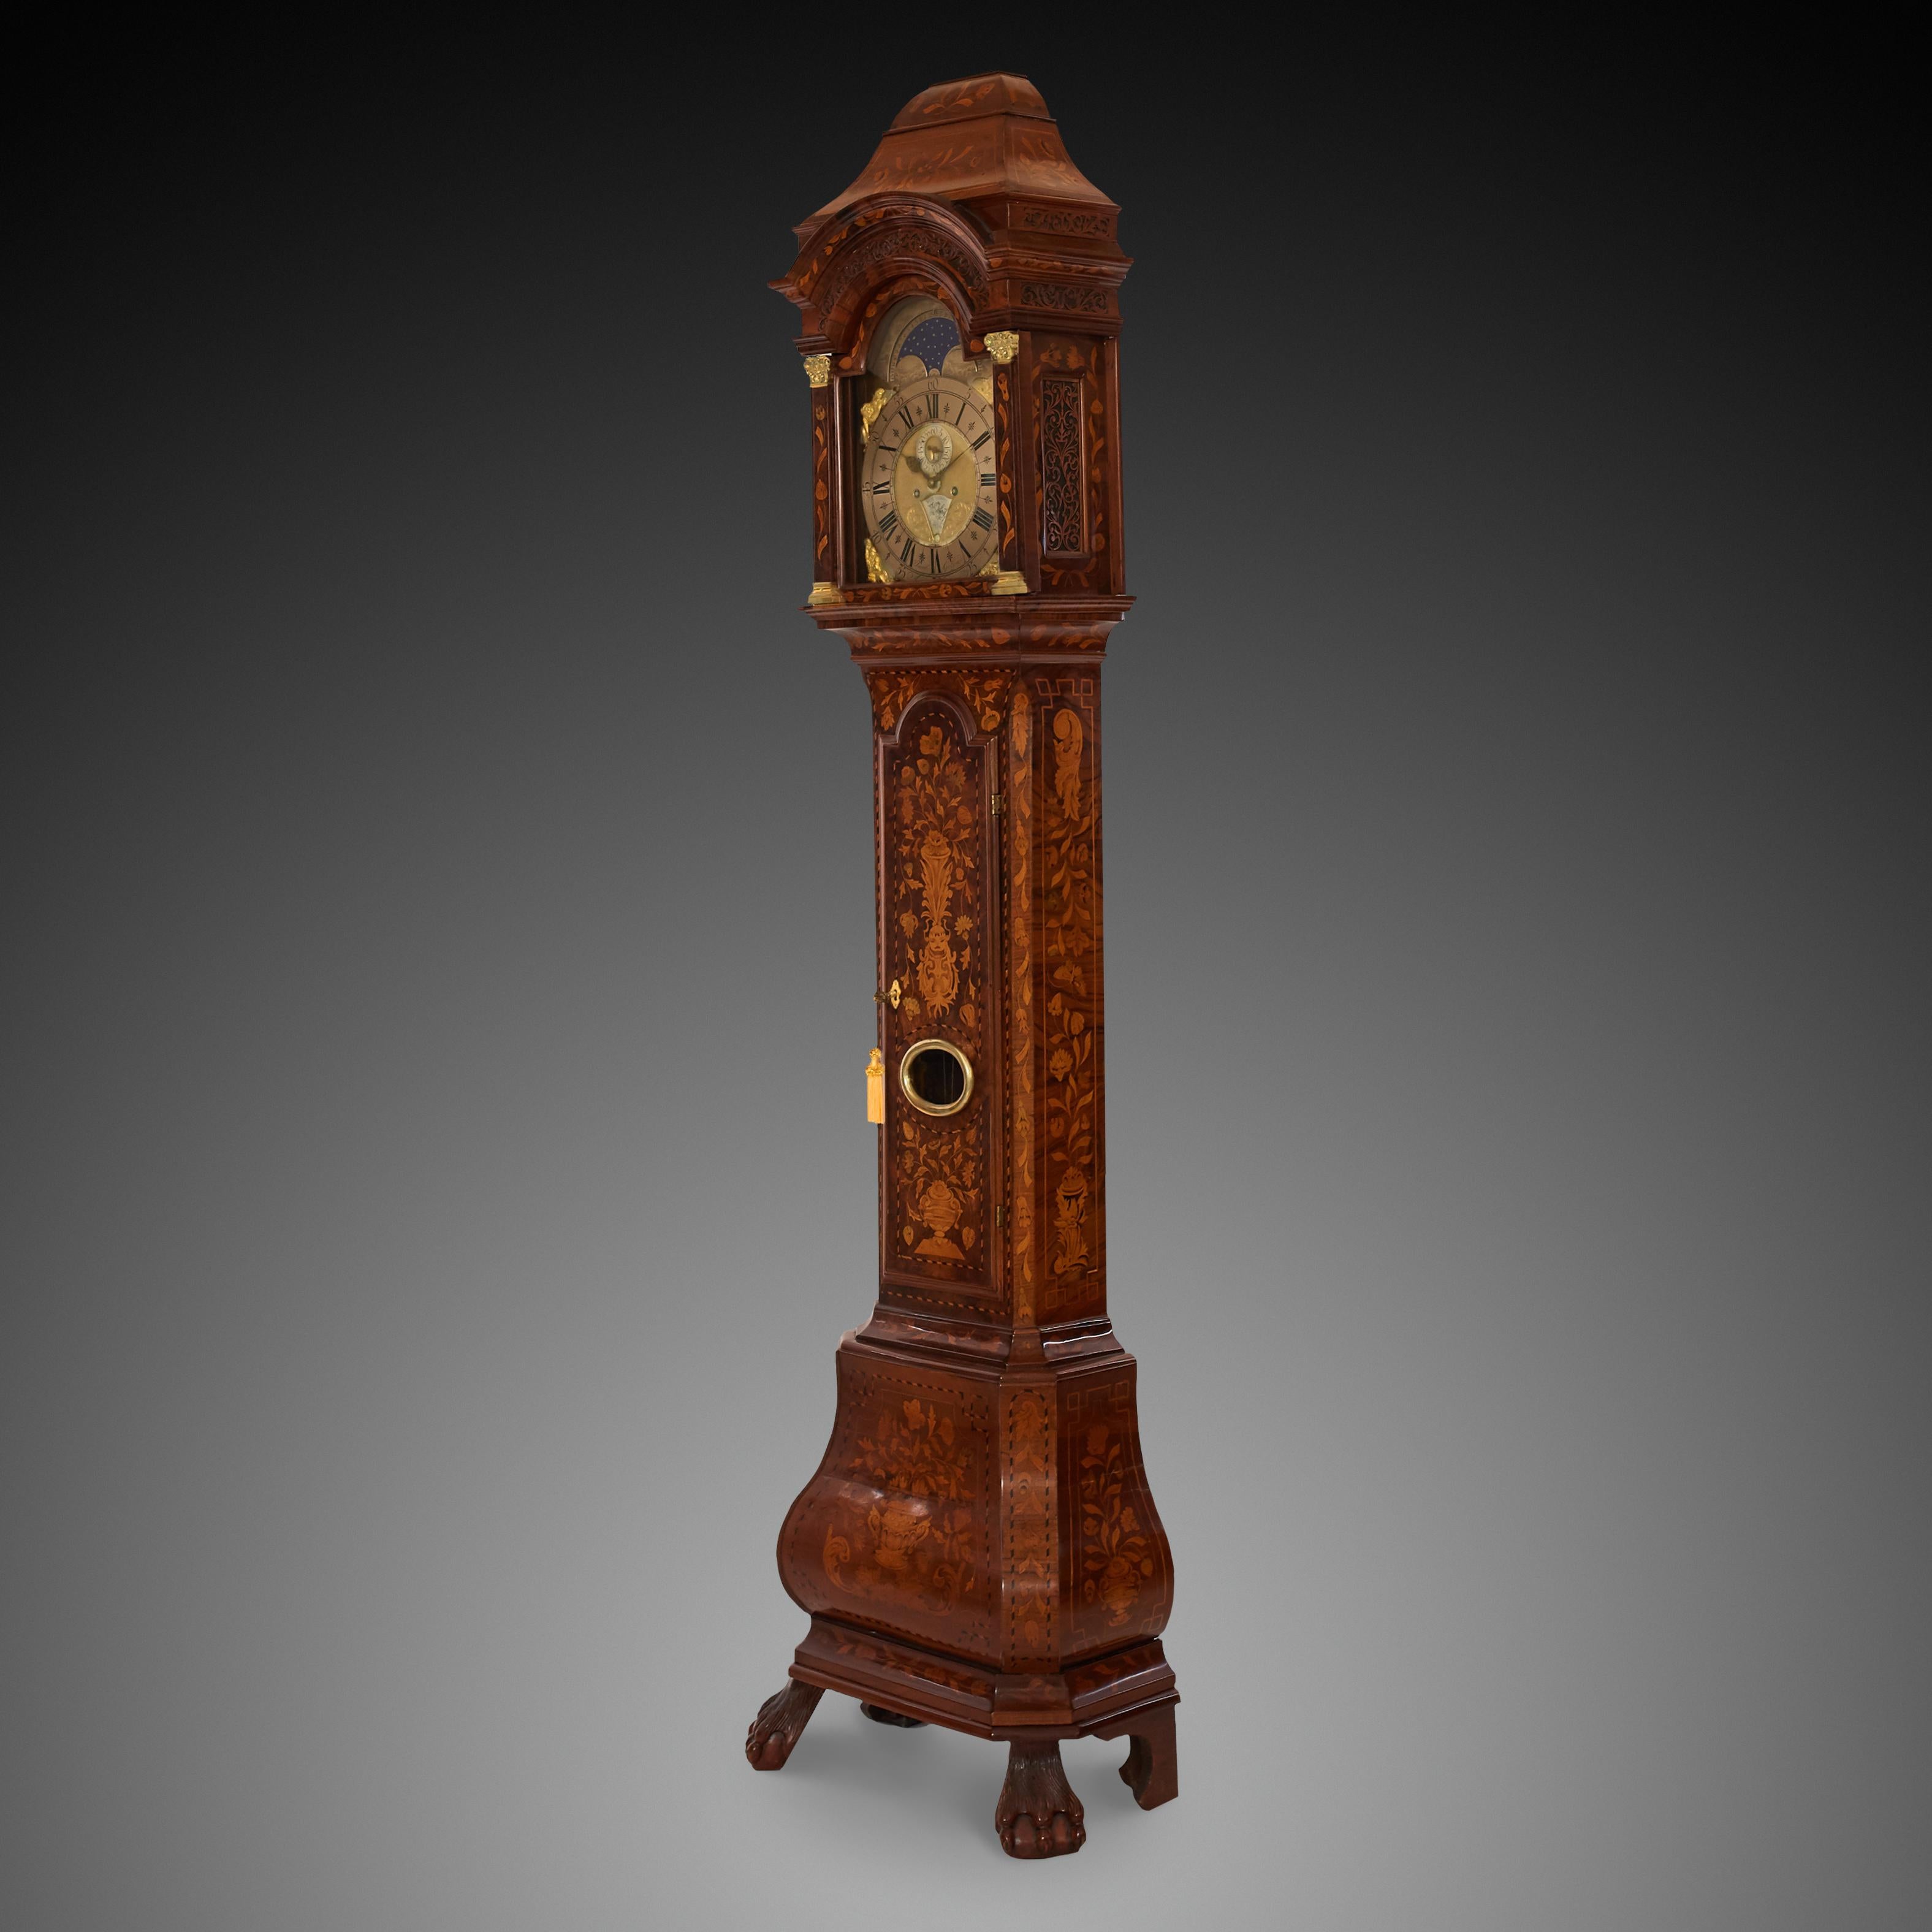 18th century clock in walnut color and Dutch style. A clock with a base on the legs decorated with floral, botanical ornaments. A shield with the phases of the moon in the form of an arc
There are functions such as seconds, minutes, hours, 
- day